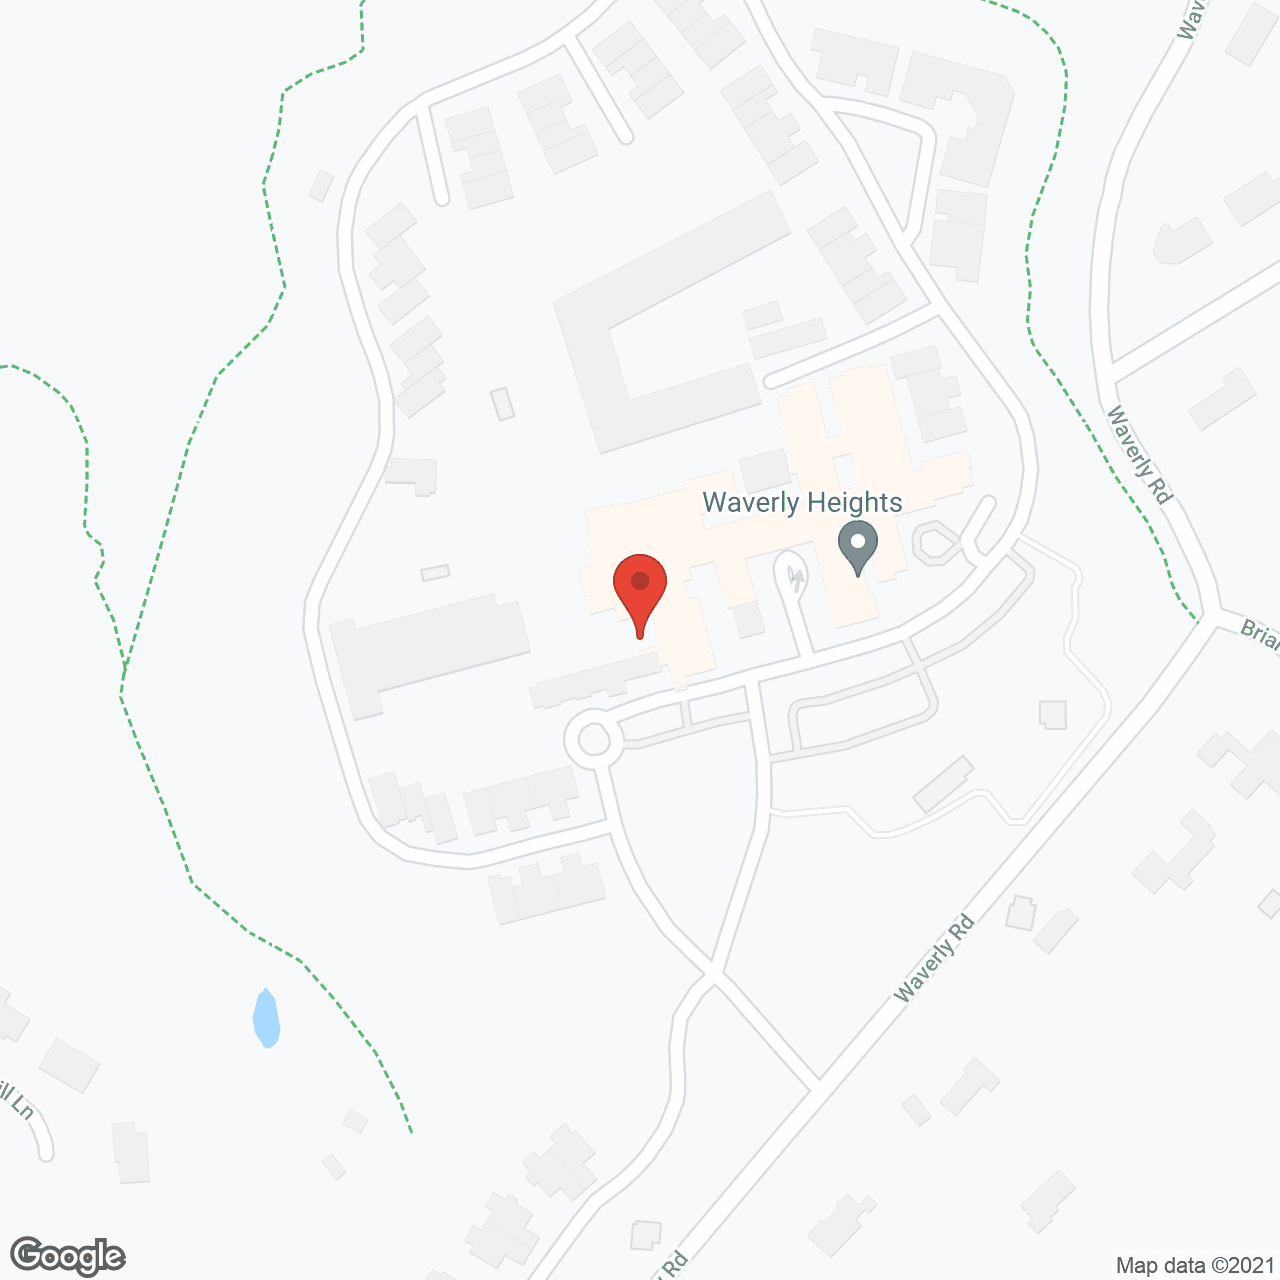 Waverly Heights in google map